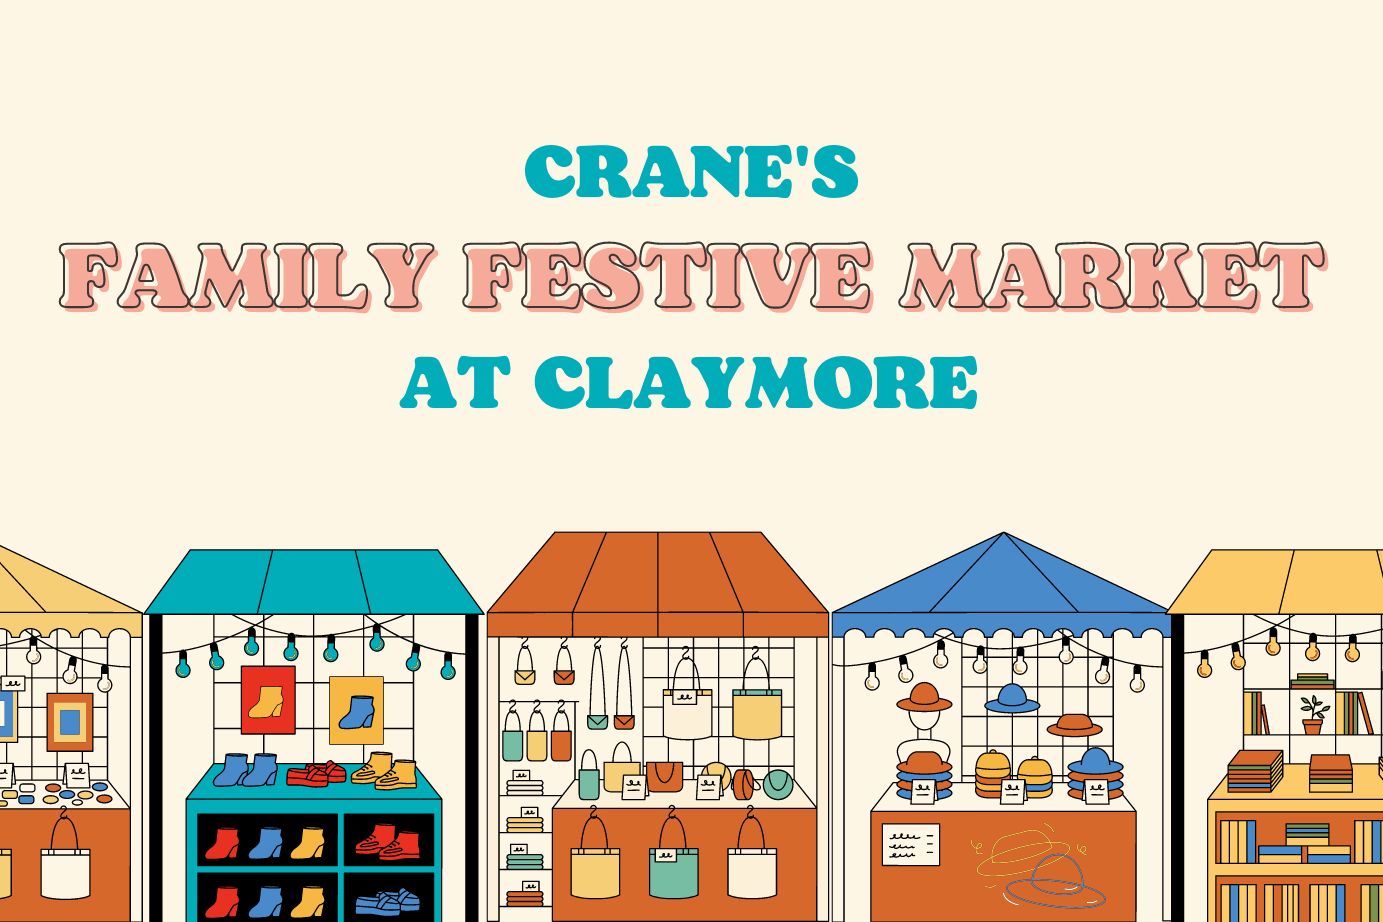 Family Festive Market - Crane at Claymore Connect